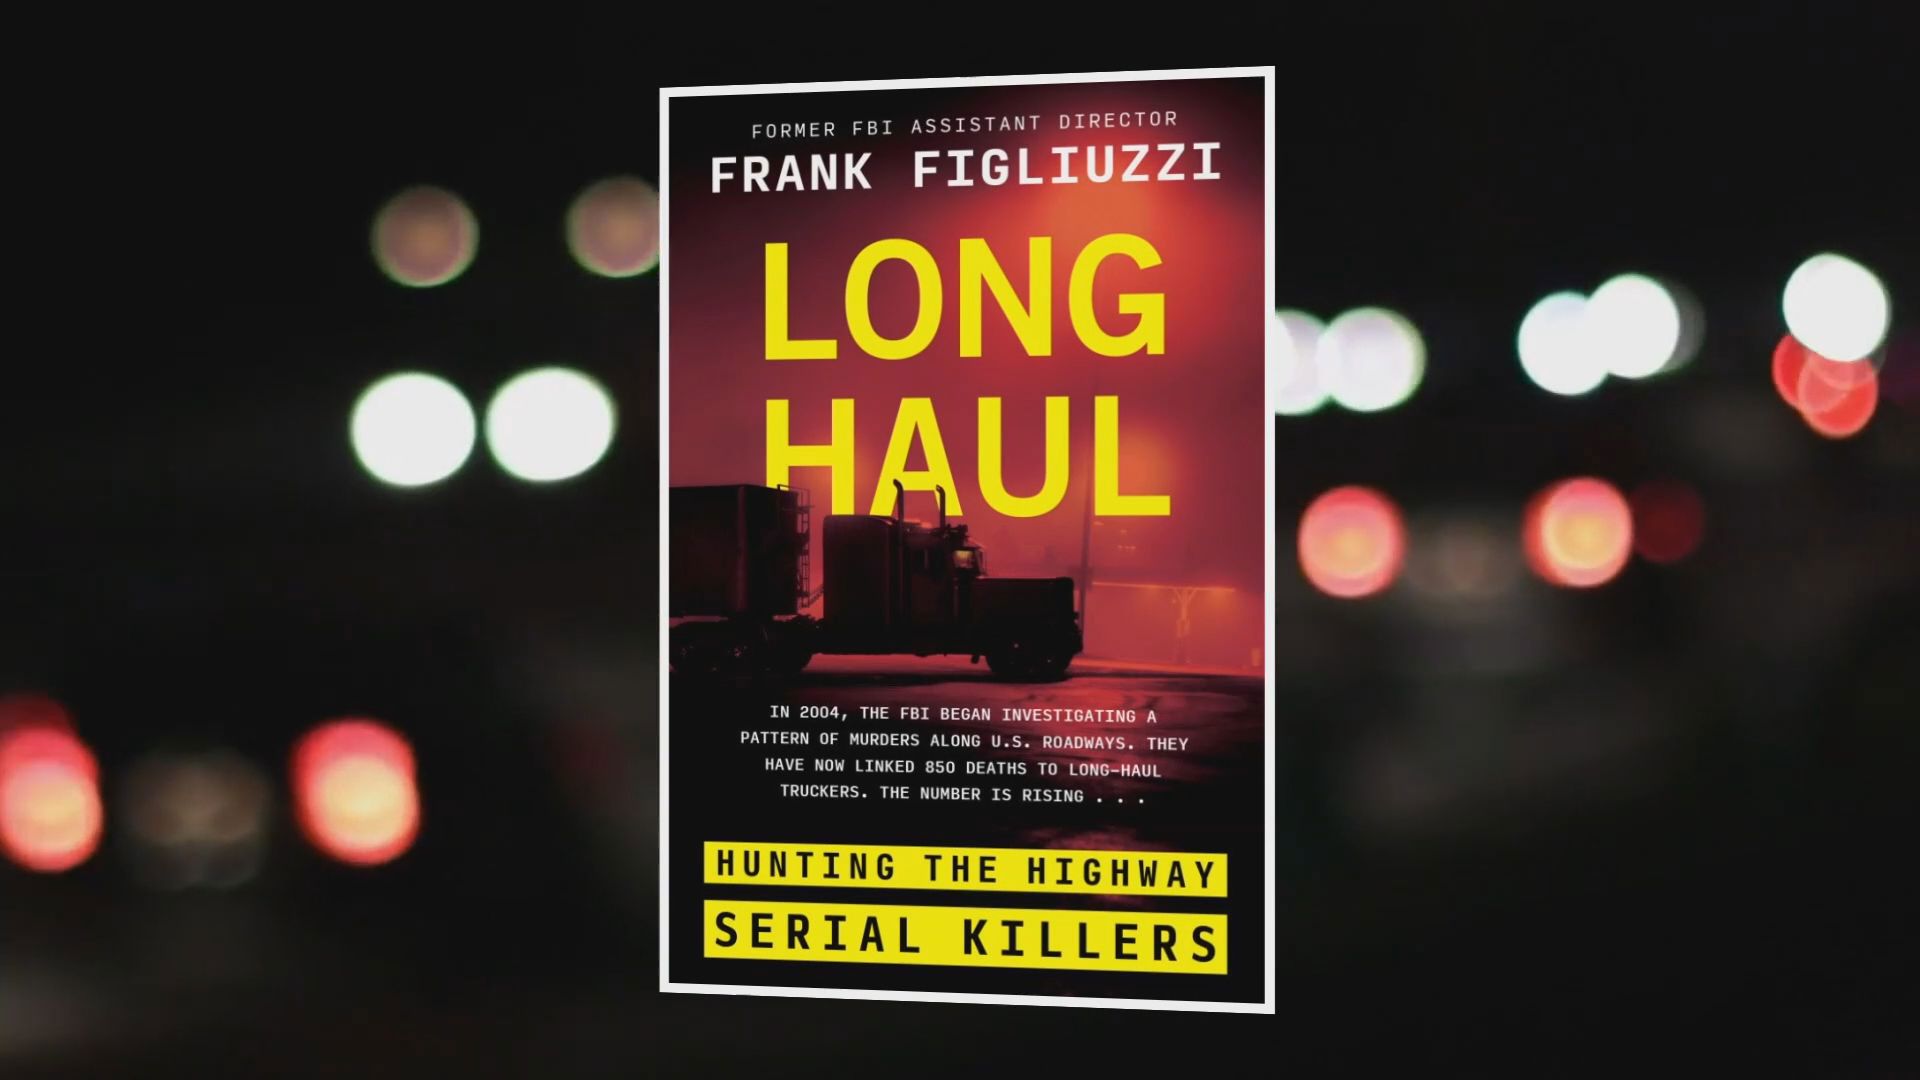 Former FBI Assistant Director Frank Figliuzzi shines a light on sex trafficking in his new book. Here's how he is working to support sex trafficking survivors.